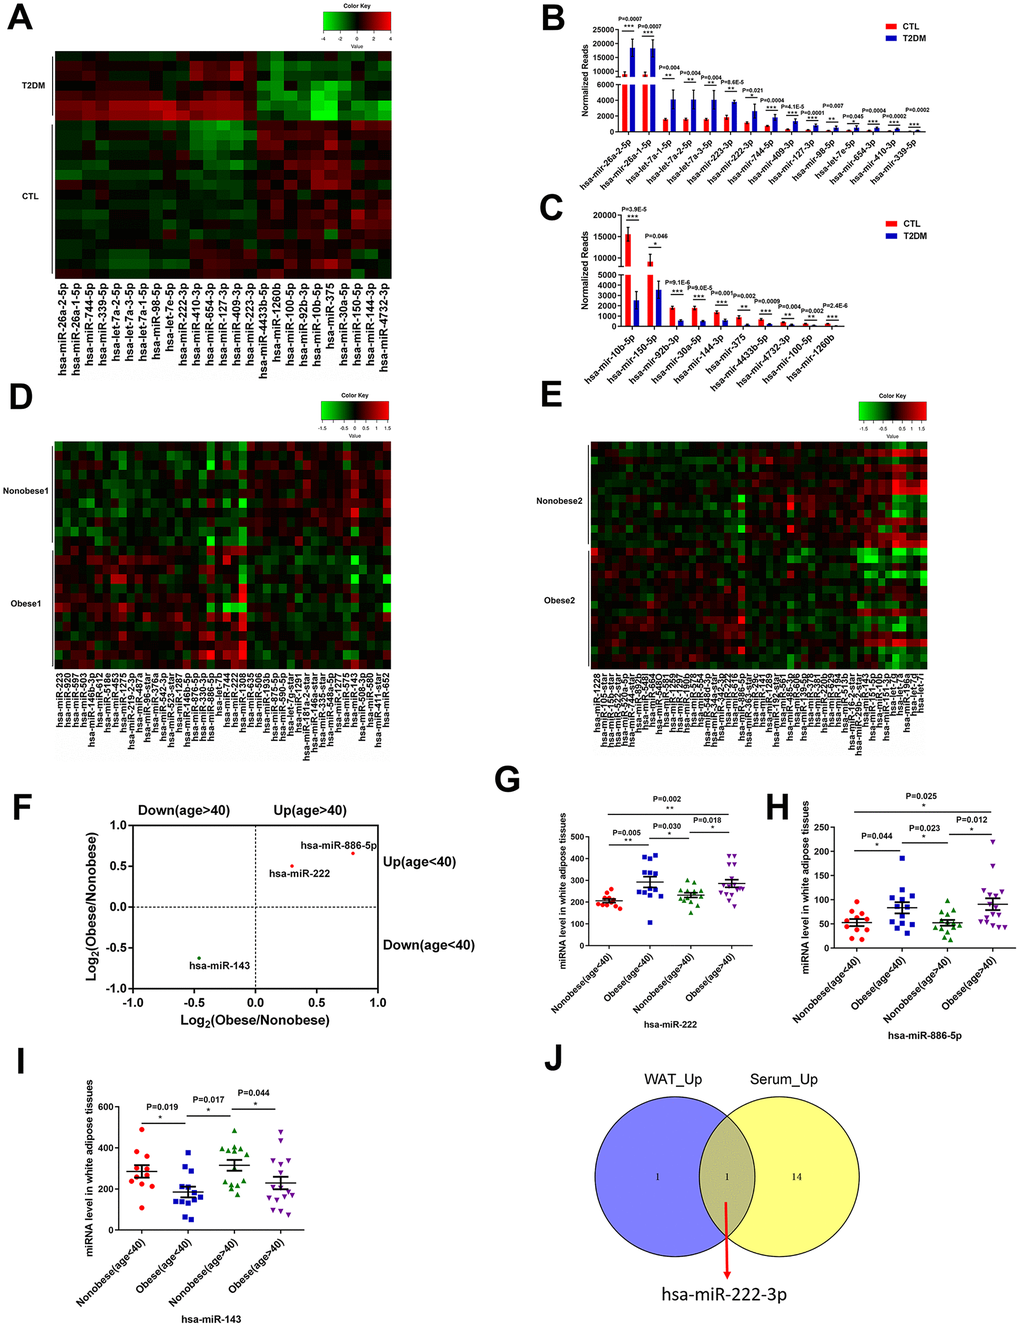 MiR-222 expression is significantly increased in the serum of T2DM patients and the white adipose tissues of obese insulin-resistant patients. (A) Heat map shows the differential expression of 25 miRNAs in the serum samples from T2DM patients (T2DM, n=7) and healthy subjects (CTL, n=16) using P  2 or B, C) The bar graphs show the normalized reads of the 15 upregulated and the 10 downregulated miRNAs in the serum of T2DM patients compared to the serum of healthy subjects. (D) The heat map shows the differential expression of 42 miRNAs in the WAT samples from the young non-obese group (Non-obese 1; n=11) and the young obese group (Obese 1; n=13) using P E) The heat map shows the differential expression of 49 miRNAs in the WAT samples from the old non-obese group (Non-obese 2; n=14) and the old obese group (Obese 2; n=16) using P F) The scatter plot shows the 3 miRNAs, miR-222, miR-143, and miR-886-5p that are differentially regulated consistently in the old and young obese individuals compared to the corresponding non-obese individuals. (G–I) The dot plots show the levels of (G) miR-222, (H) miR-886-5p, and (I) miR-143 in the WAT samples from the young non-obese, young obese, old non-obese, and old obese groups. (J) The Venn diagram shows that miR-222 is the only miRNA that is upregulated in both the T2DM patient serum (15 upregulated miRNAs) and obese (young and old) WAT (2 upregulated miRNAs) samples. Note: The results in (A–C) are based on the GSE90028 dataset. The results in (D–I) are based on the GSE25402 dataset. Note: T2DM, type 2 diabetes mellitus; WAT, white adipose tissue; Data are presented as the means ± SE; *P **P ***P 